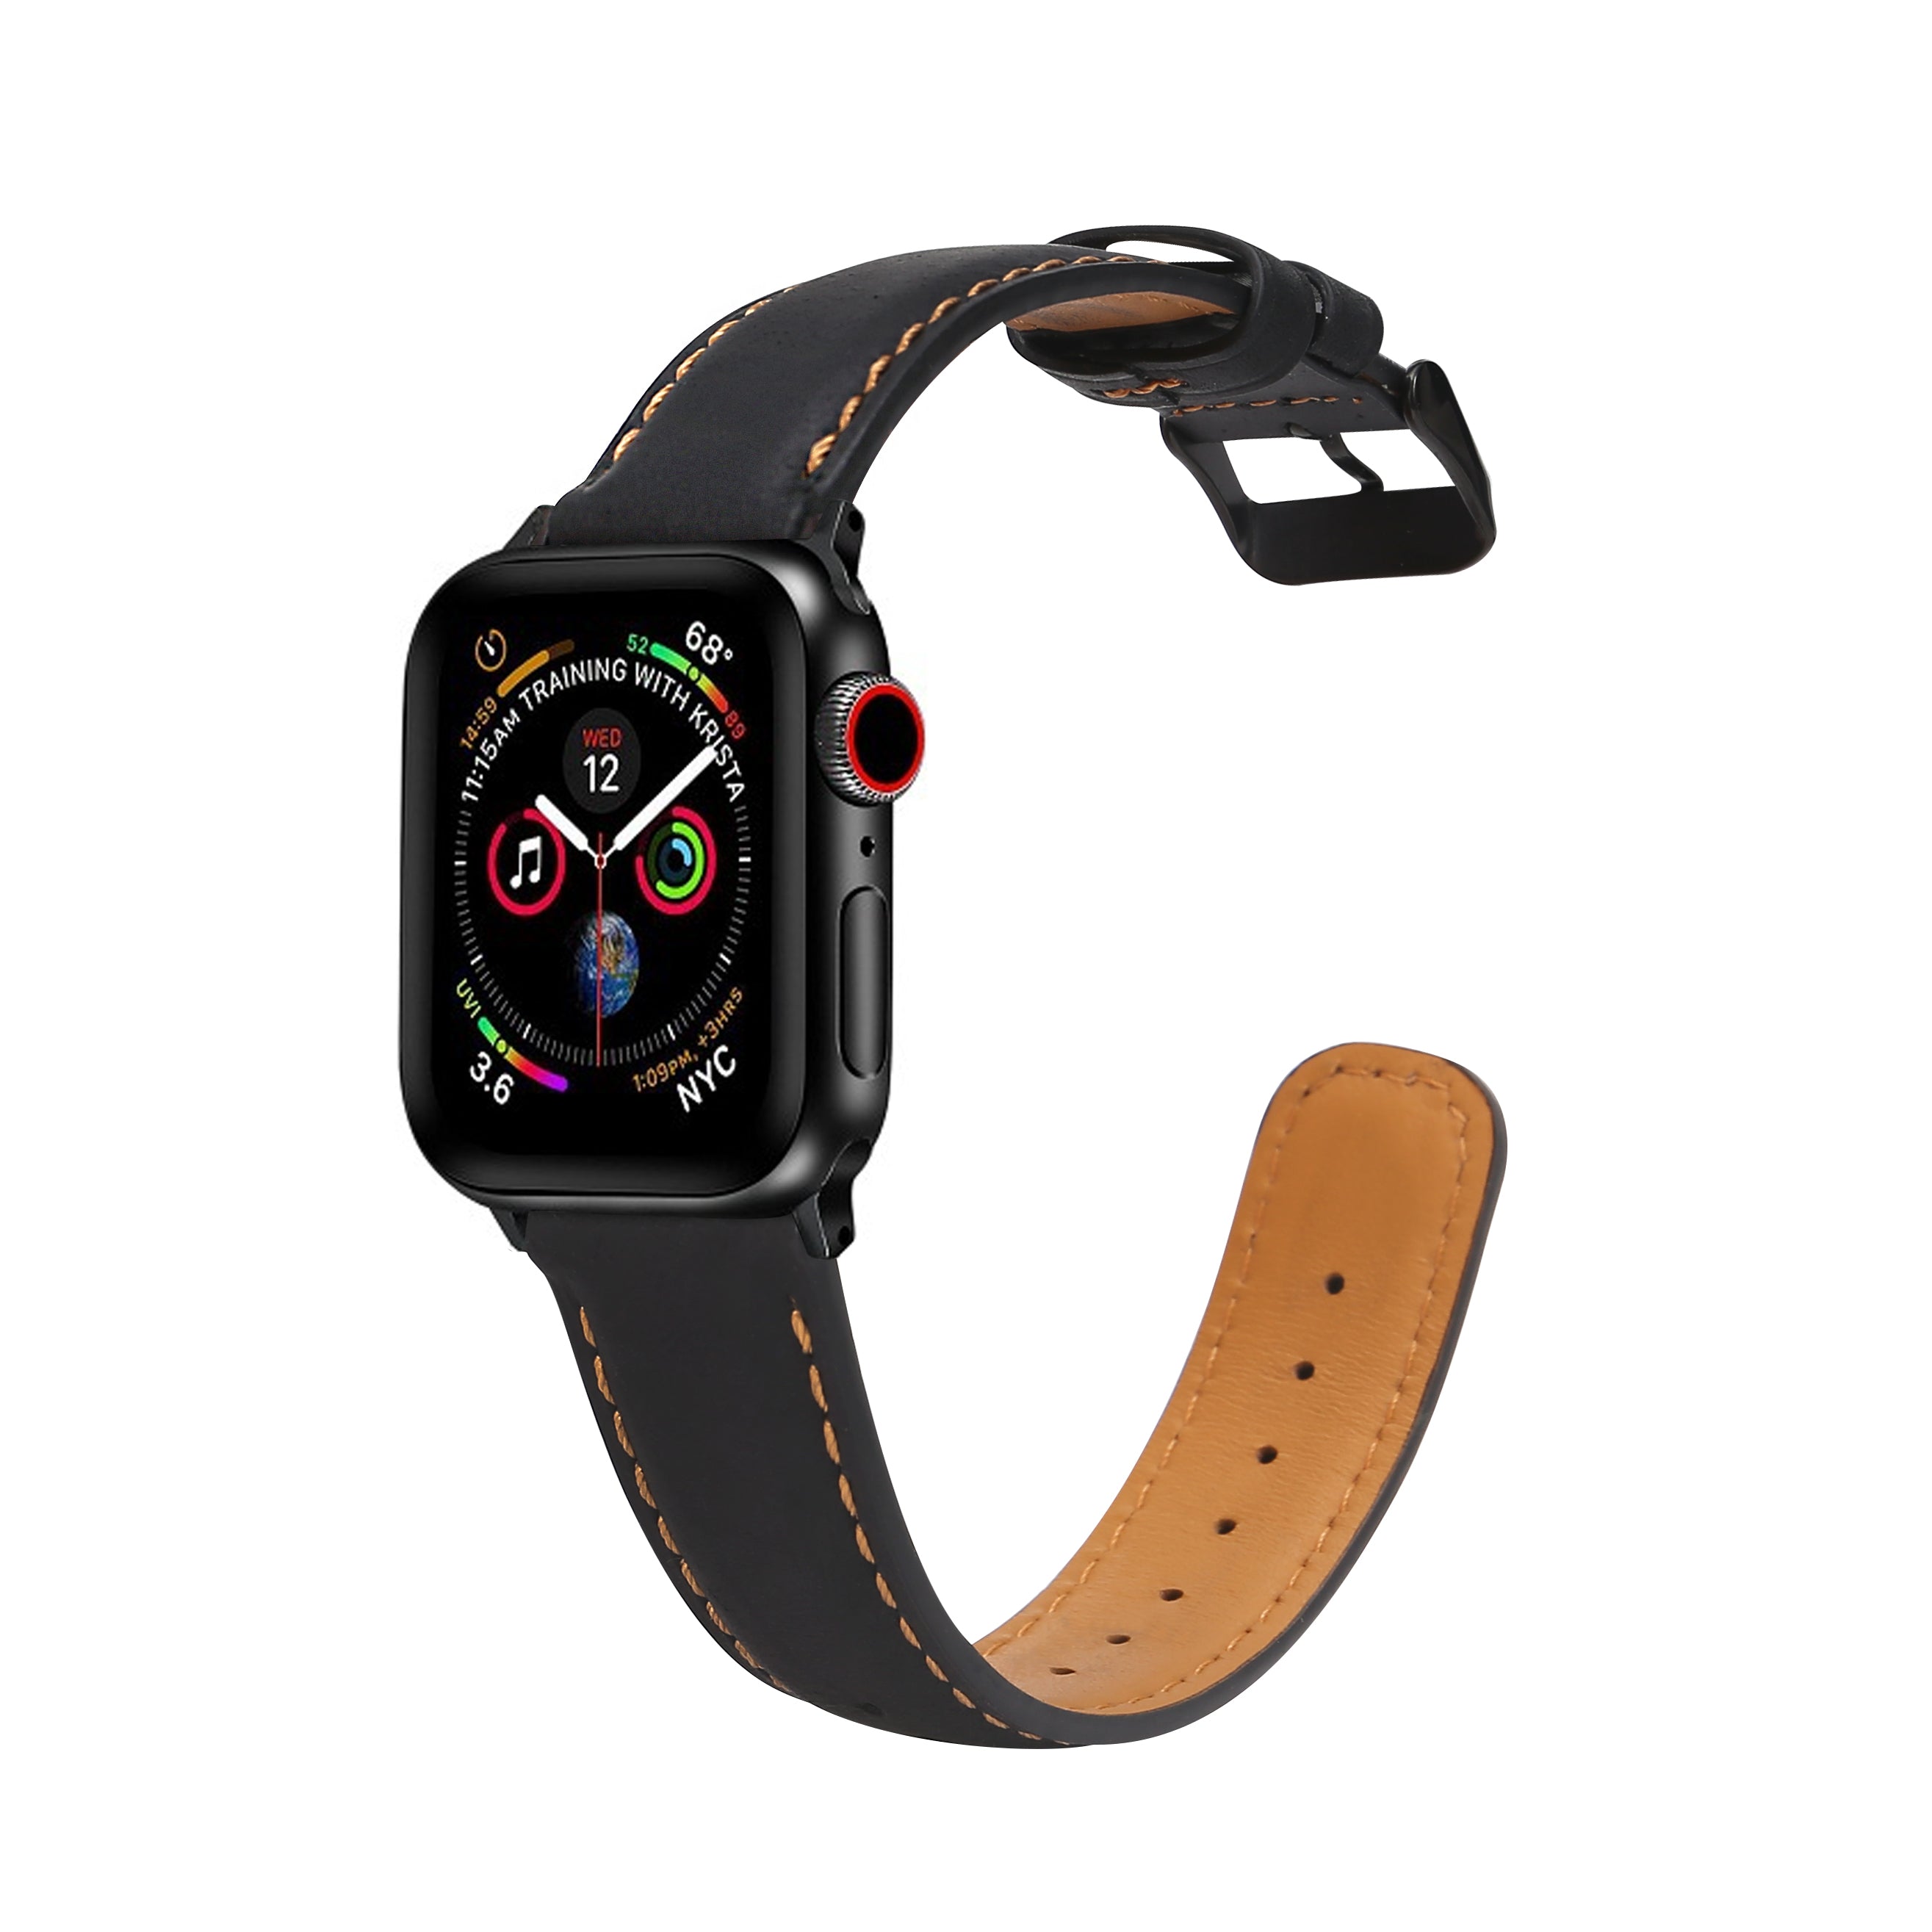 navor Leather Replacement Band with Stainless-Steel Clasp for Apple Watch